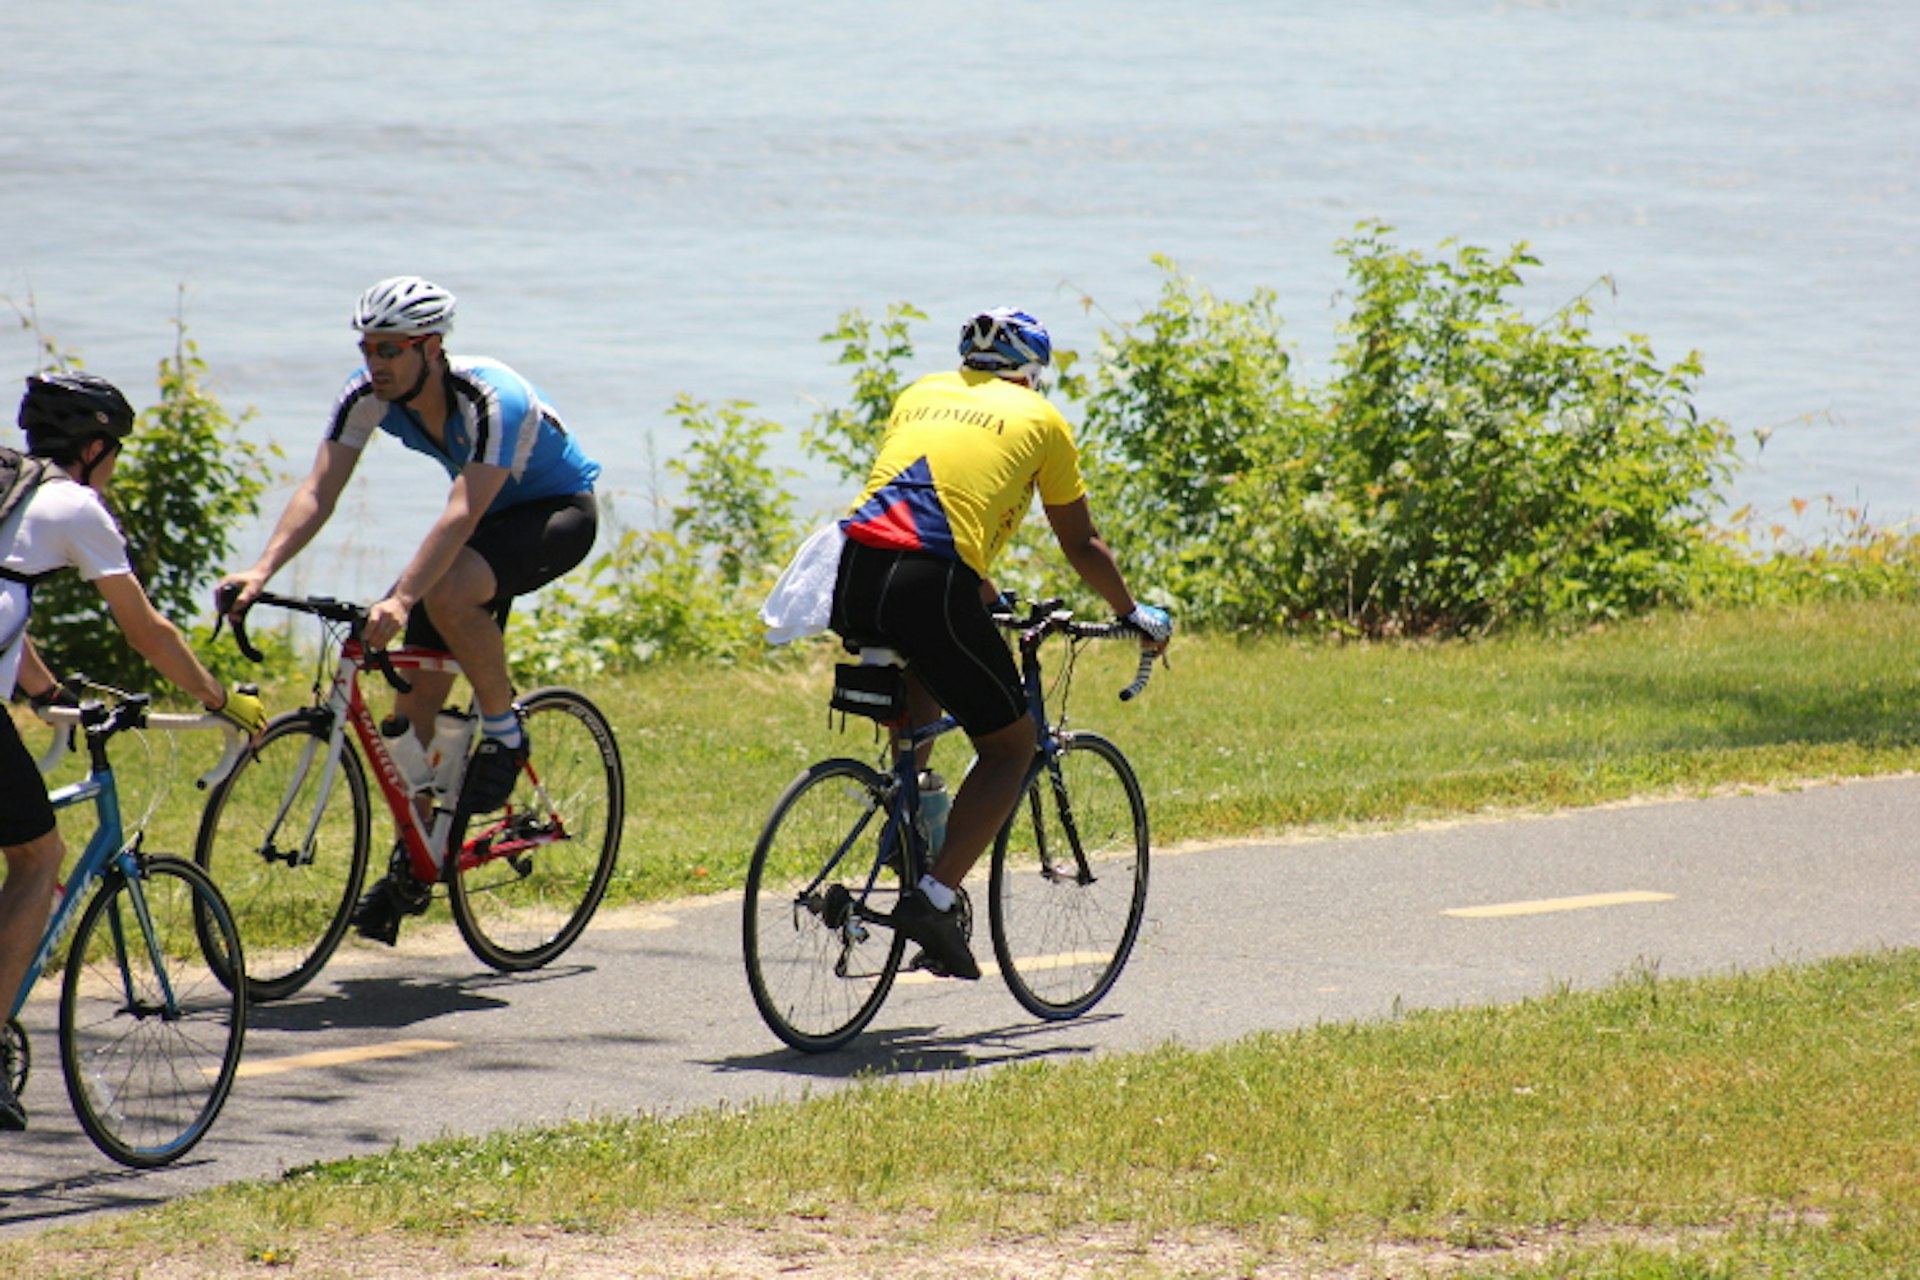 Verdant Mount Vernon Trail makes for some fine riding close to DC. Image by Elvert Barnes / CC BY-SA 2.0